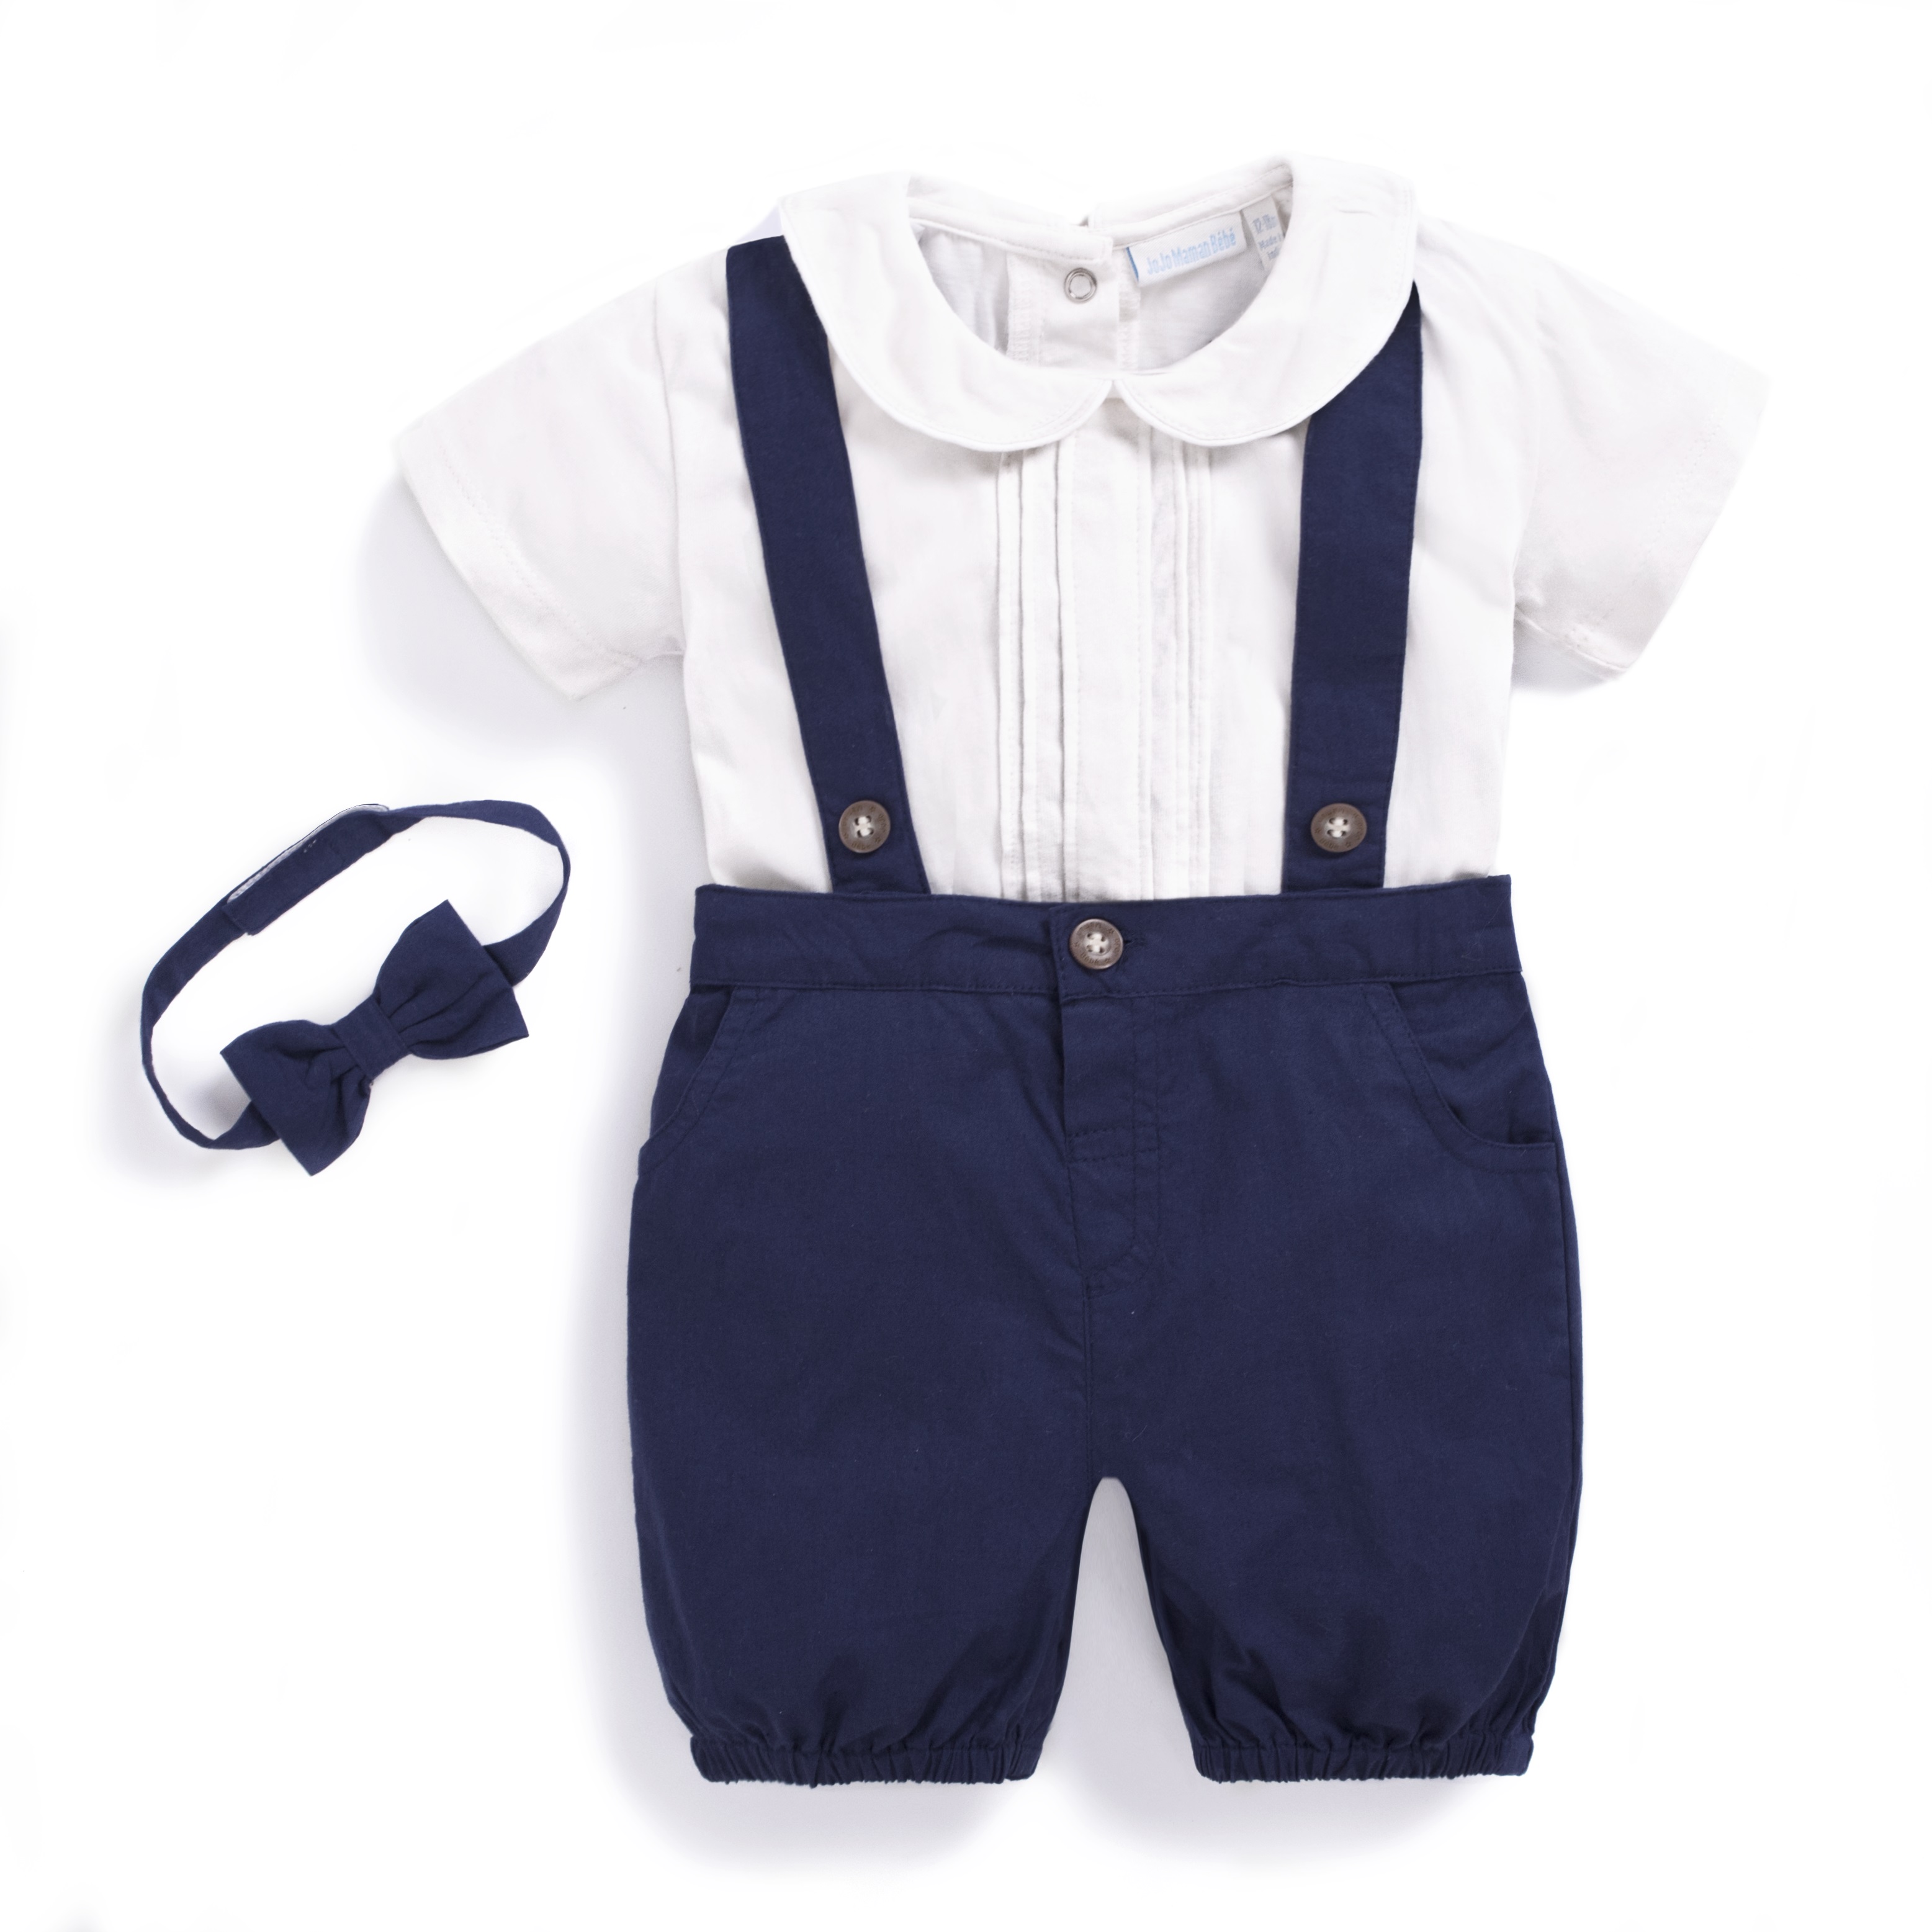 Top 102+ Wallpaper Baby Boy Outfits For Pictures Idea Stunning